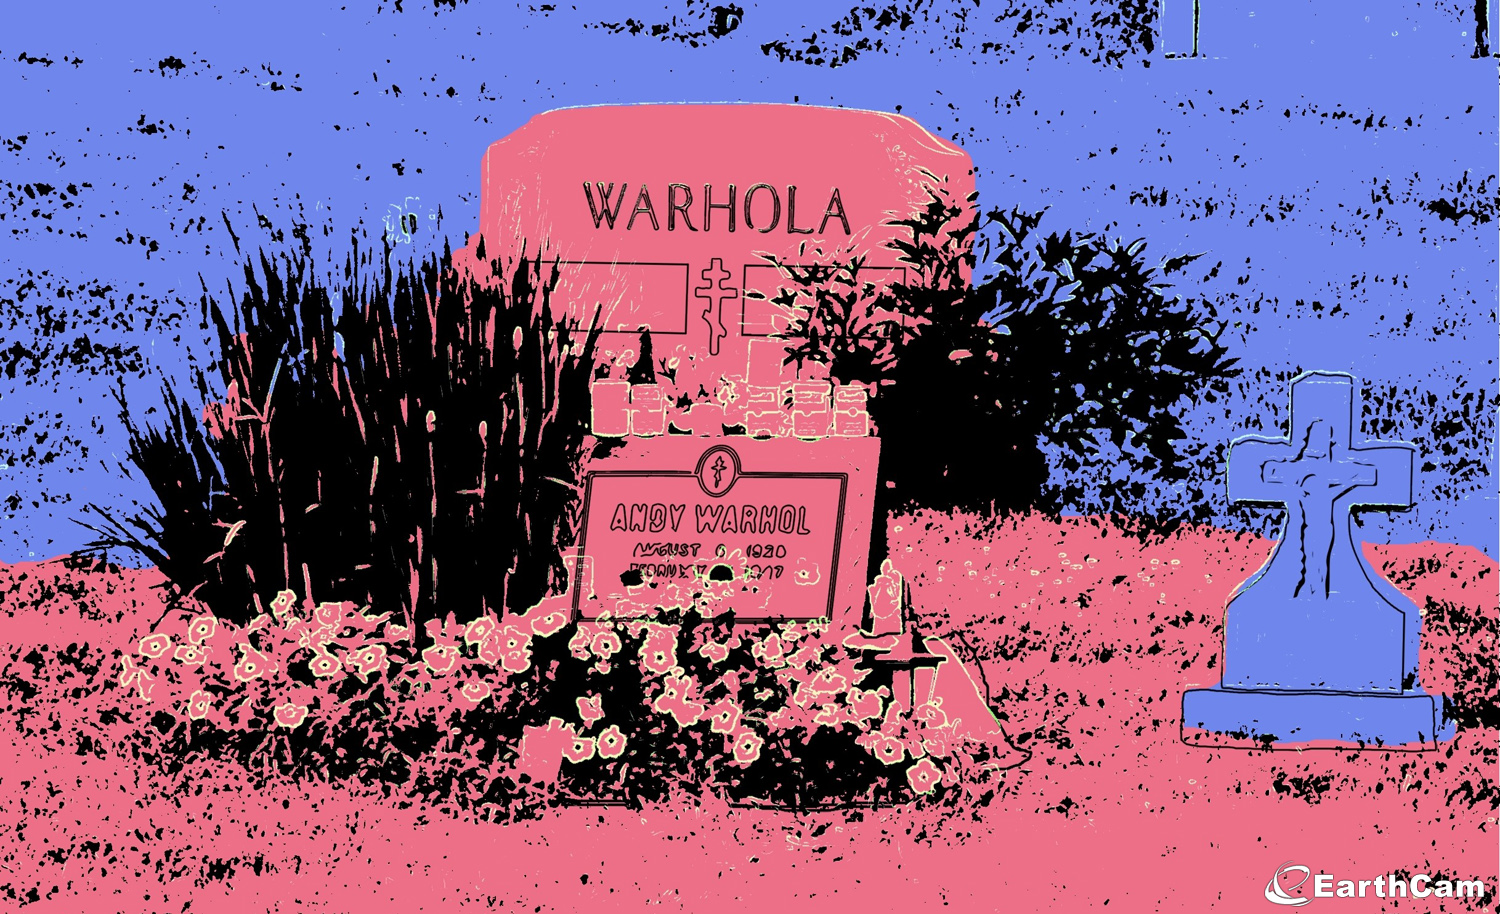 Warholian image effects and color pallets are integrated into gravesite snapshots for one-of-a-kind art.